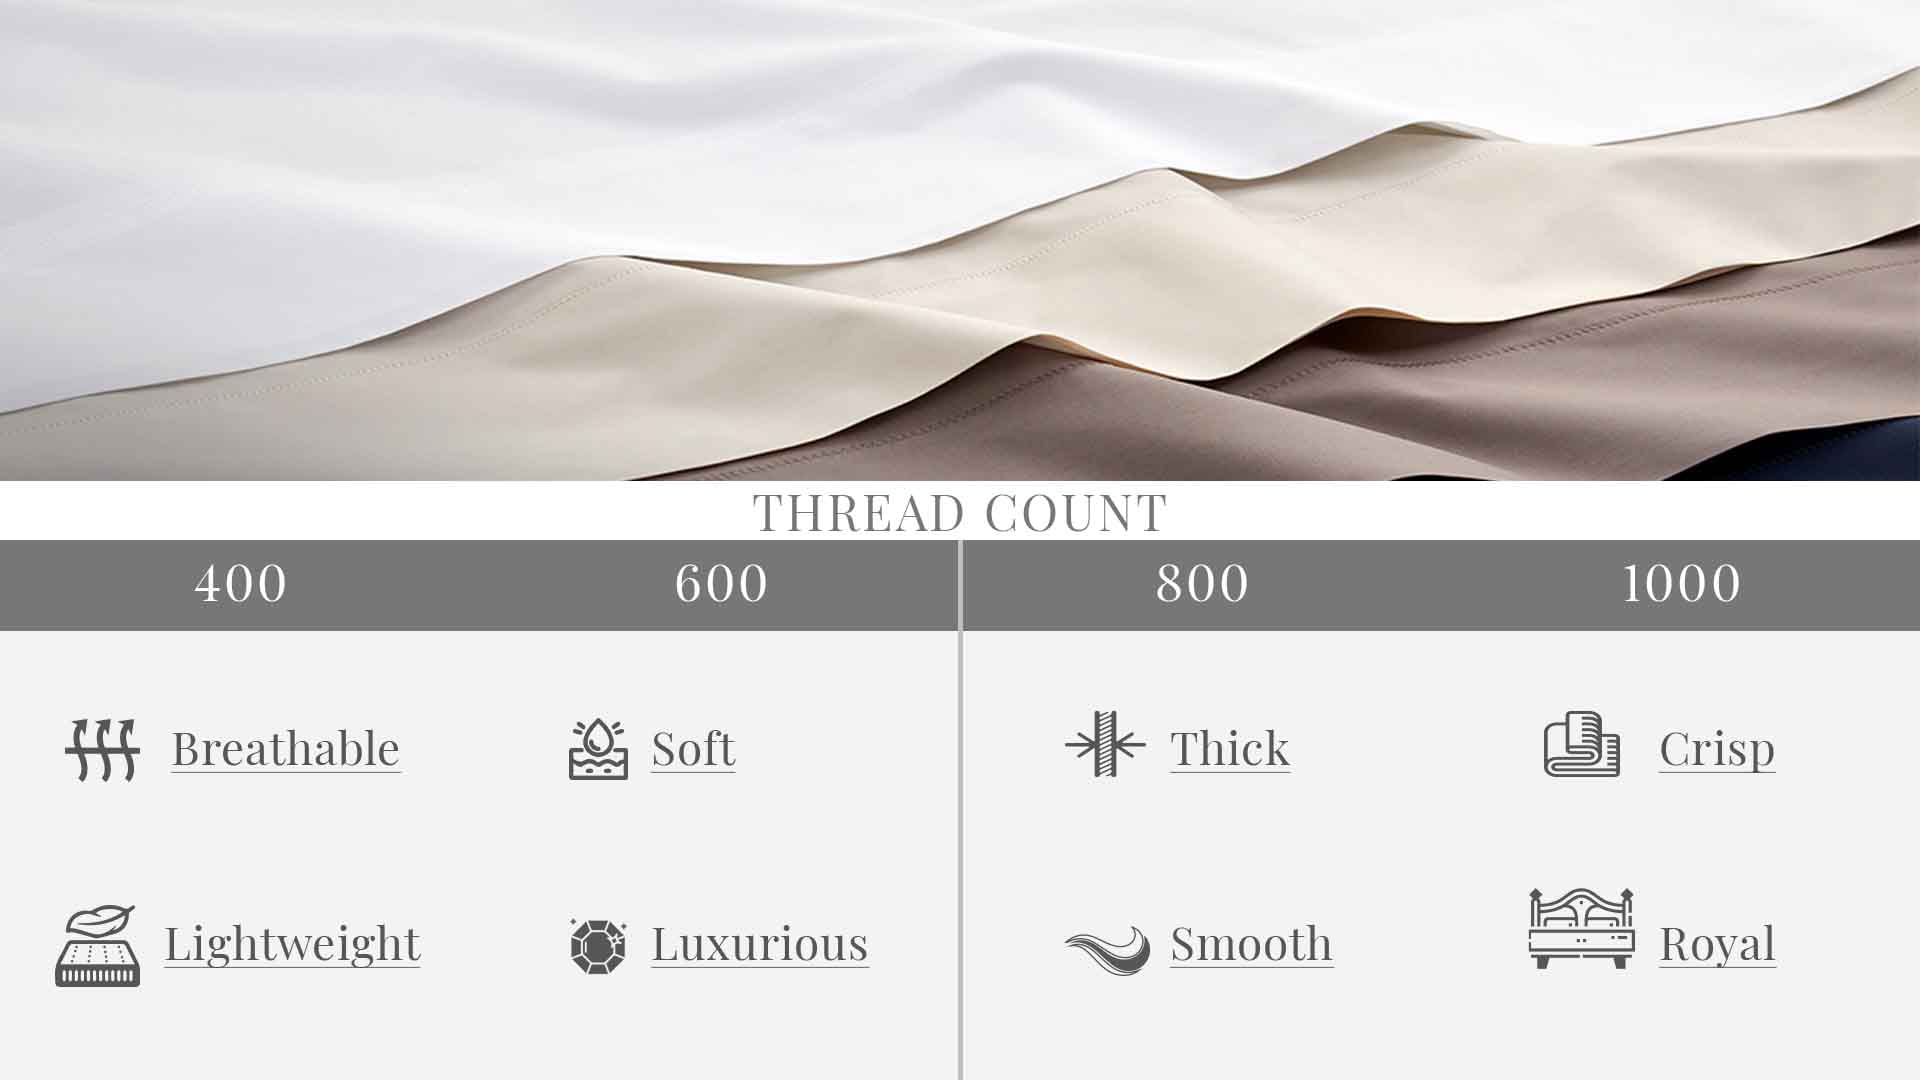 What is the best thread count for sheets?